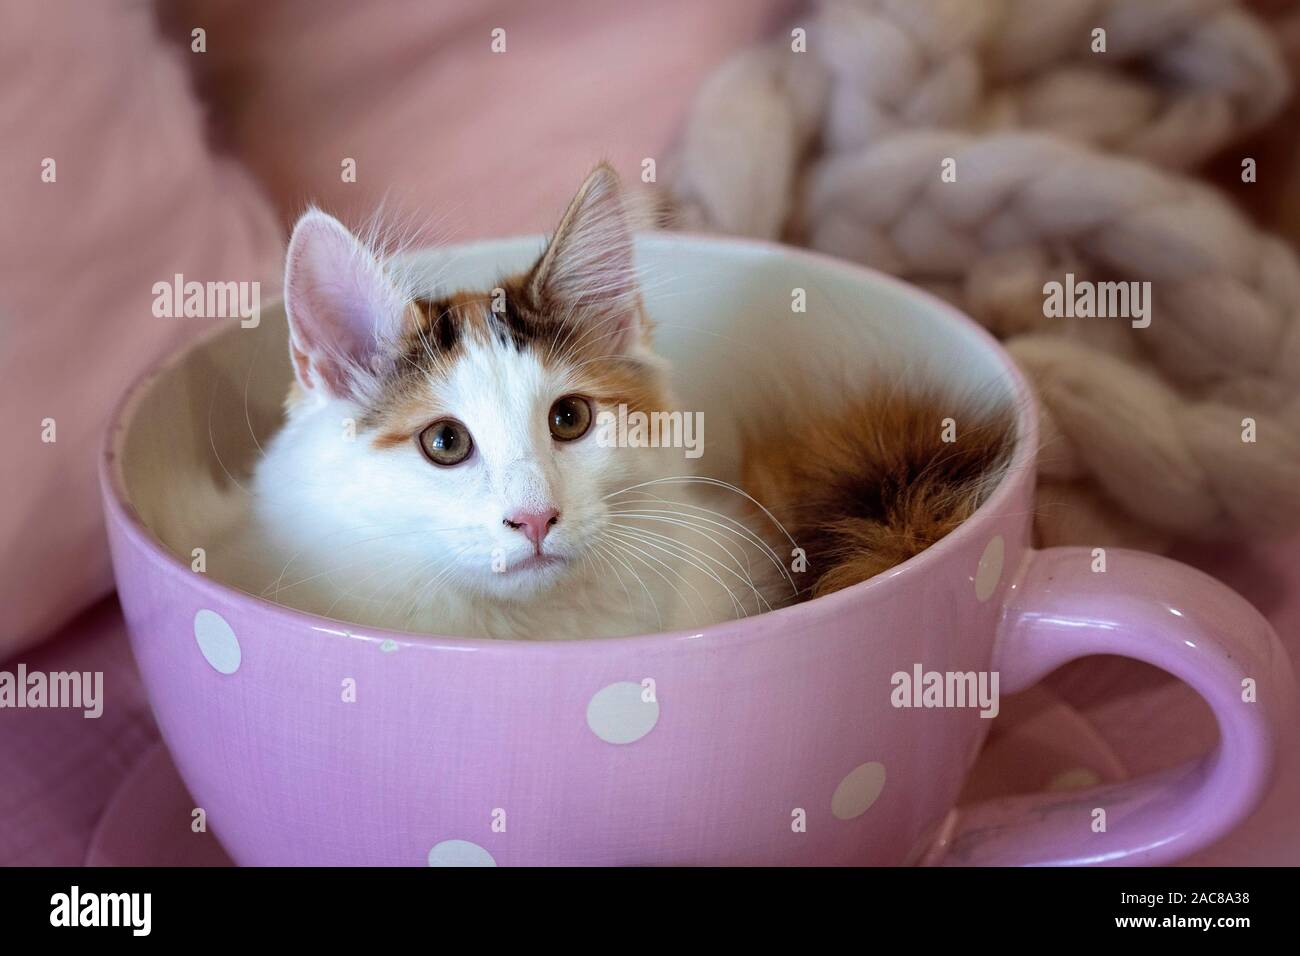 A Norwegian Forest kitten sitting in a pink polka dot tea cup, looking up Stock Photo